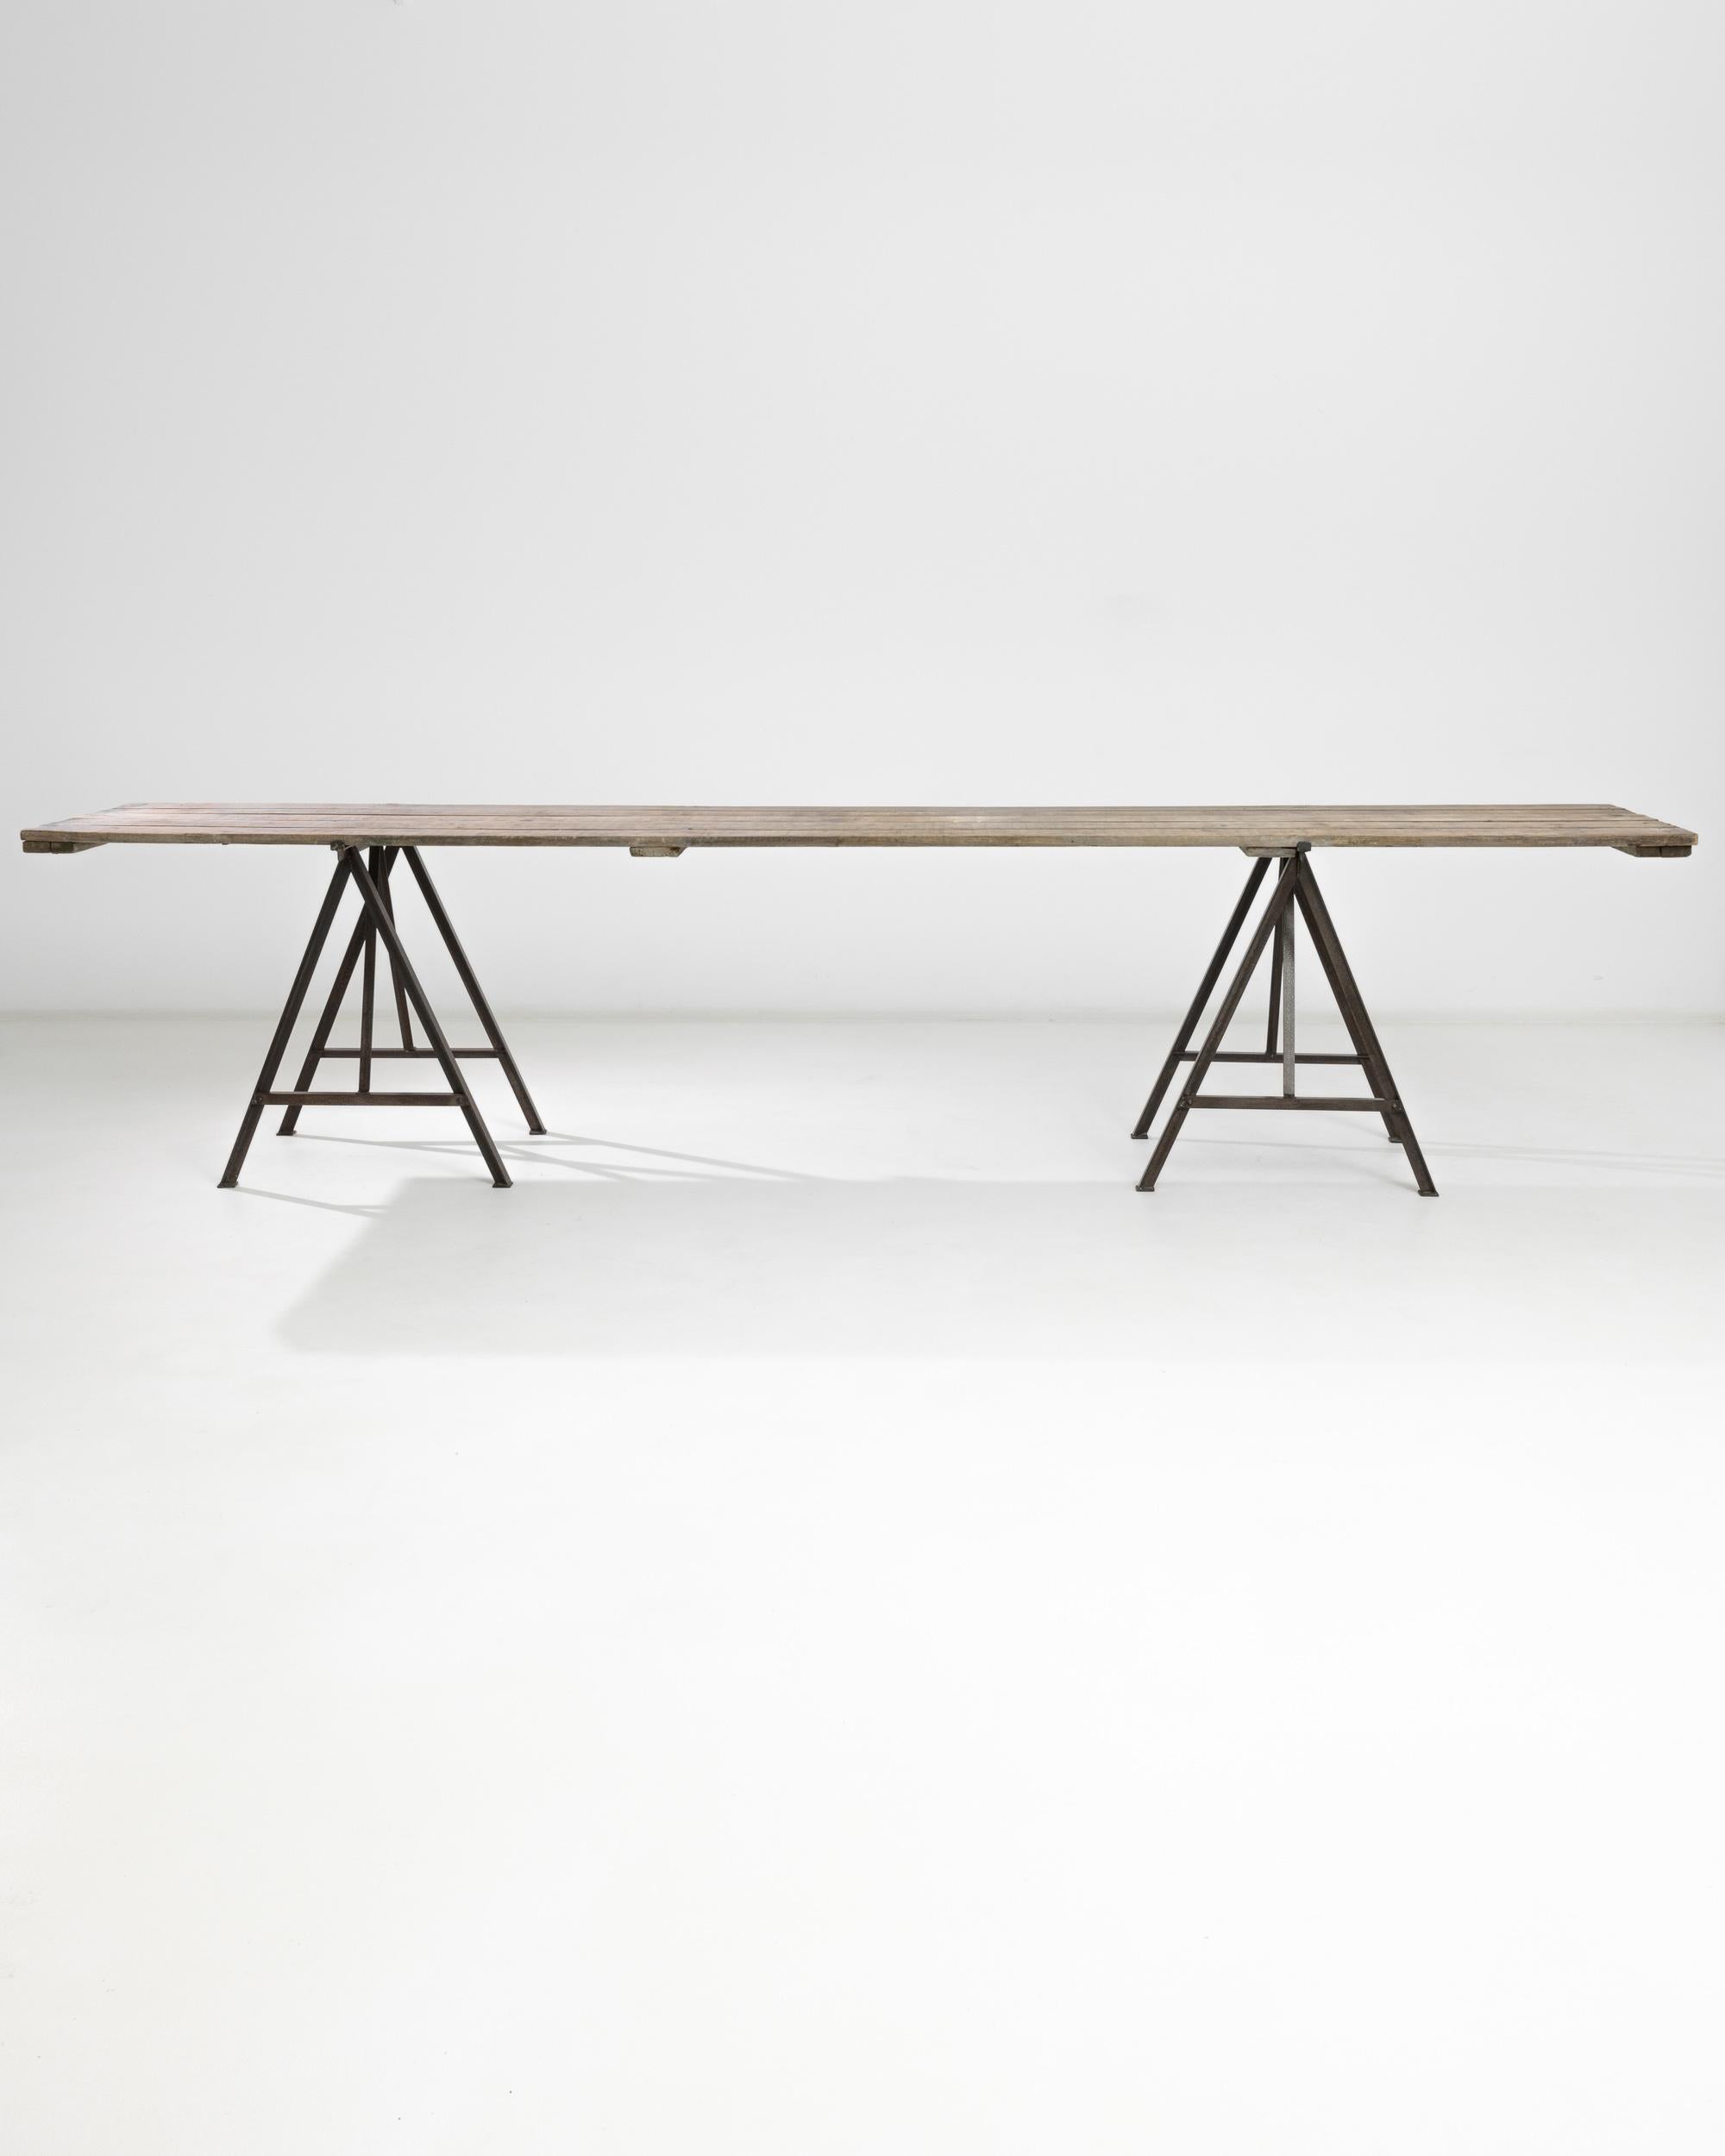 A metal table with wooden top from France, produced circa 1900. A massive vintage table, spanning an impressive length in excess of eleven feet, that manages to maintain a low-key personality even at its opulent size. A simple table constructed of